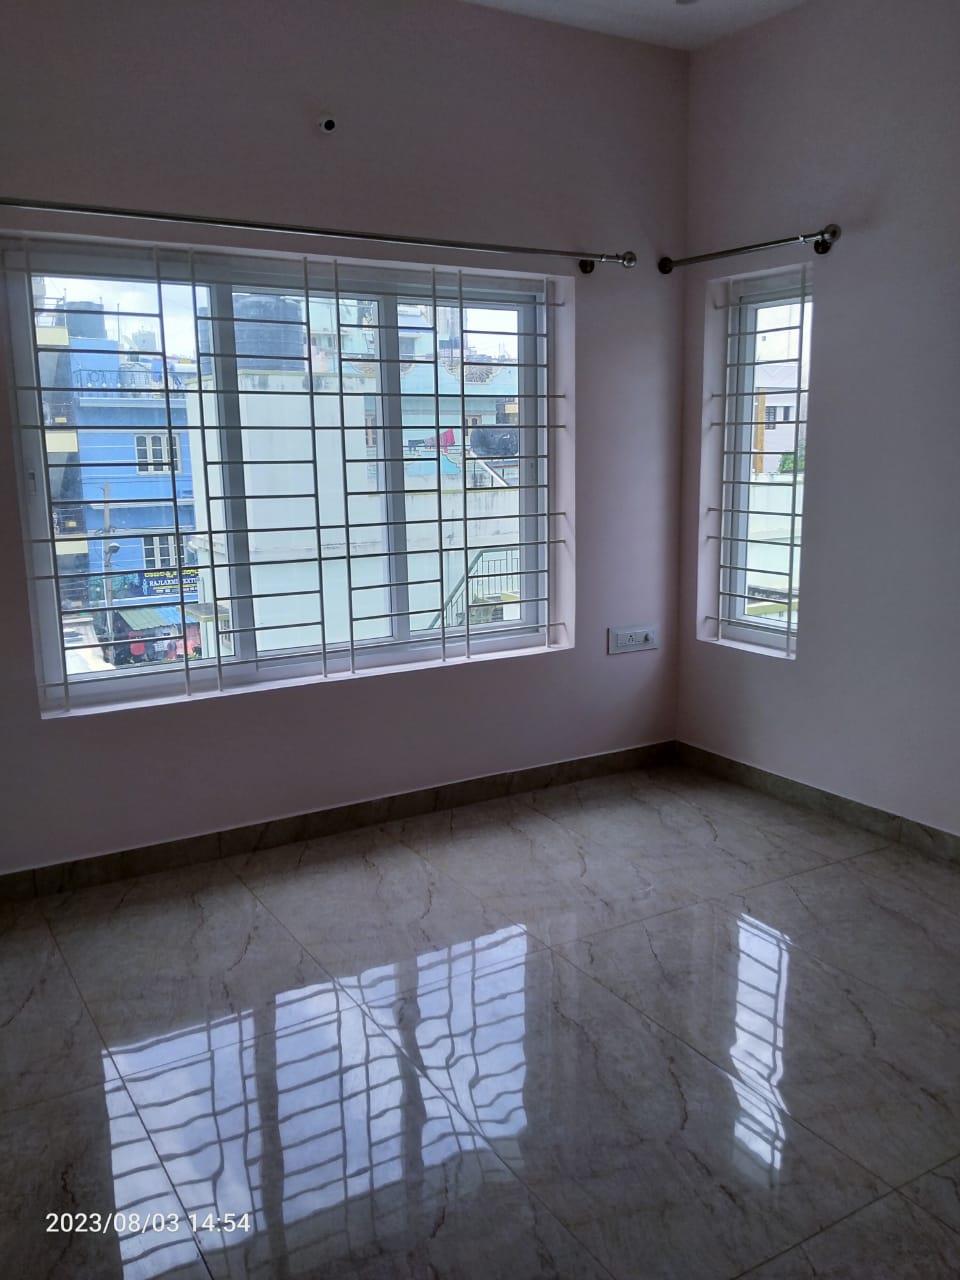 3 BHK Residential Apartment for Lease Only at JAML2 - 1017 in Bolare